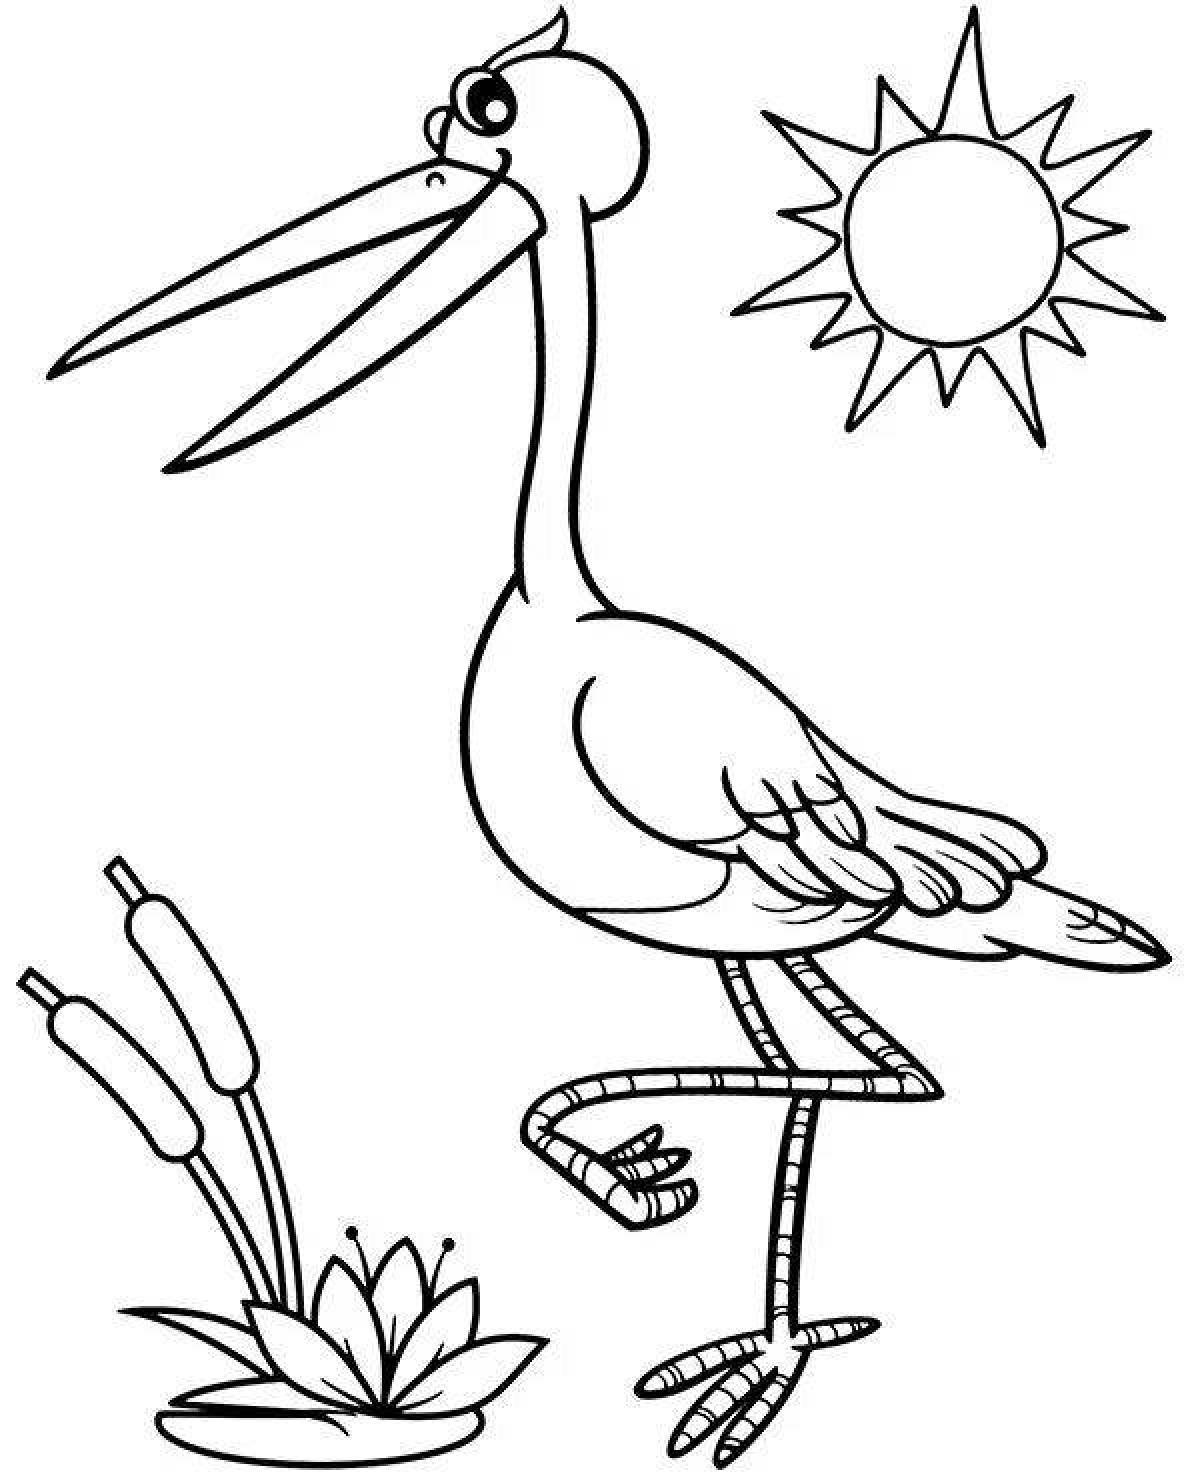 Colorfully illustrated black stork coloring page